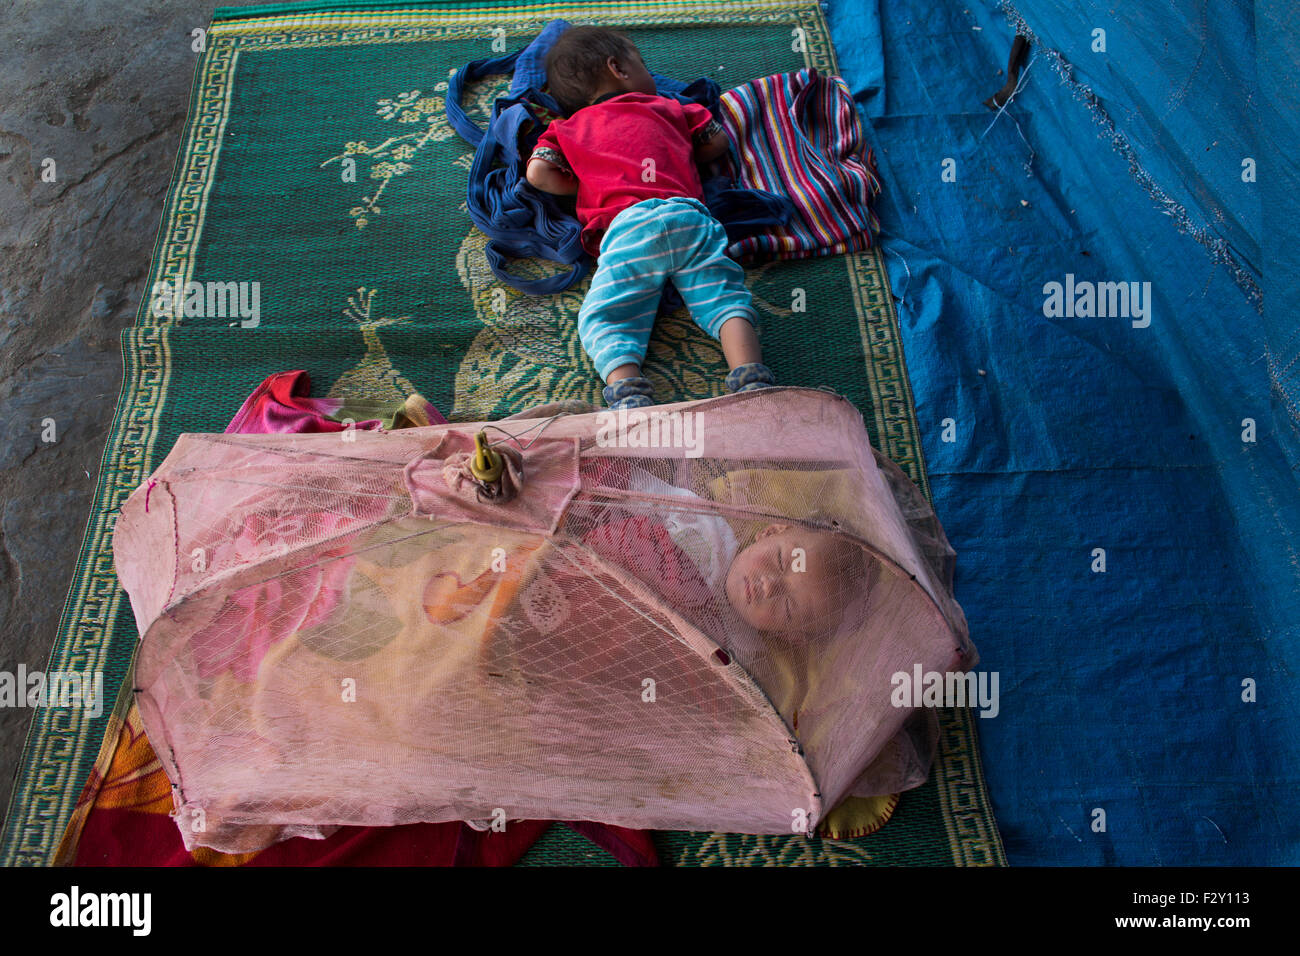 babies from the ethnic Hmong tribe in Vietnam Stock Photo